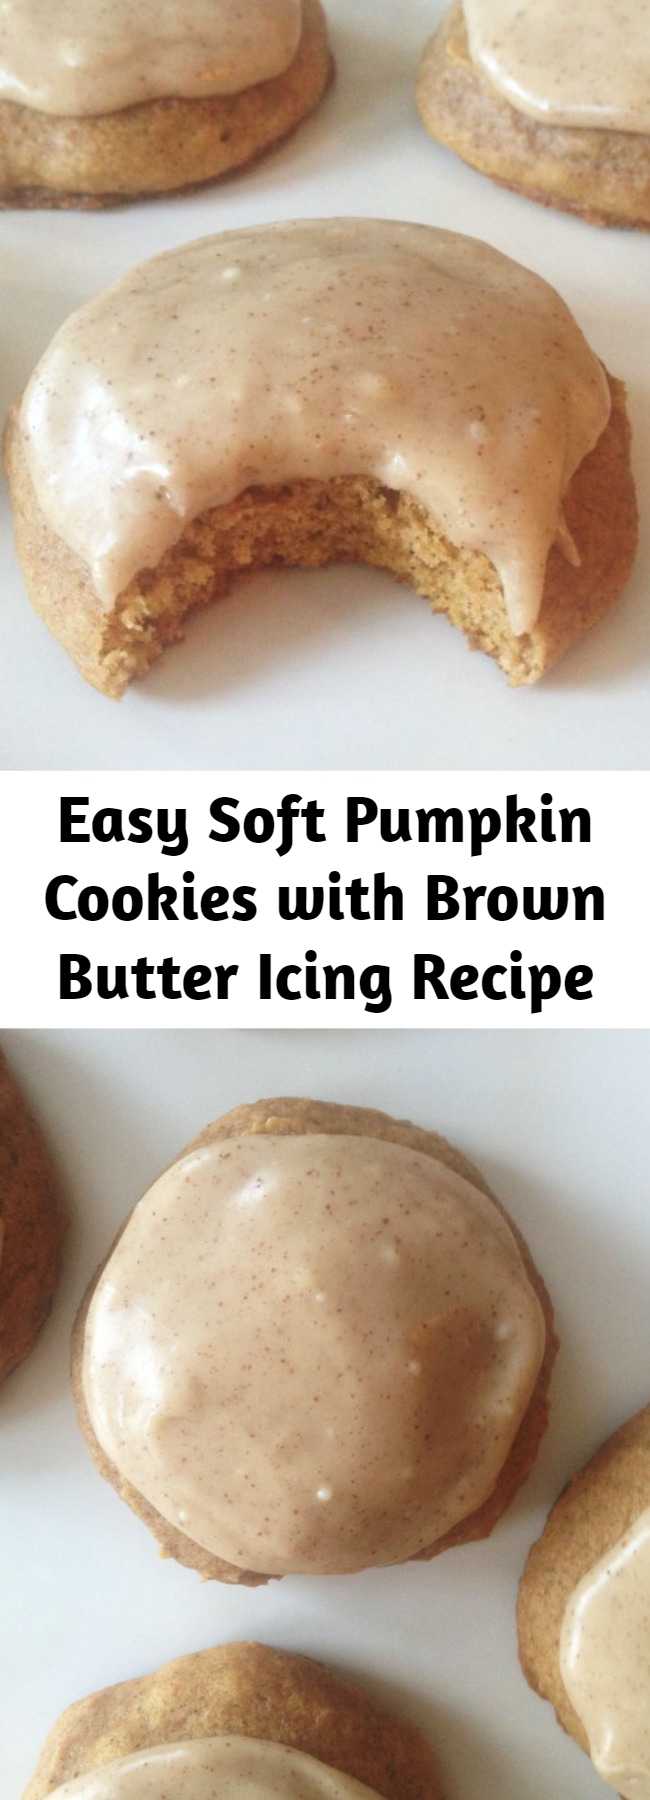 Easy Soft Pumpkin Cookies with Brown Butter Icing Recipe - A soft and tender cake-like pumpkin cookie with pumpkin pie spices, slathered with an amazing brown butter frosting! These Pumpkin Cookies with Brown Butter Icing is the pumpkin recipe that started the whole pumpkin obsession for me, and they do not disappoint!